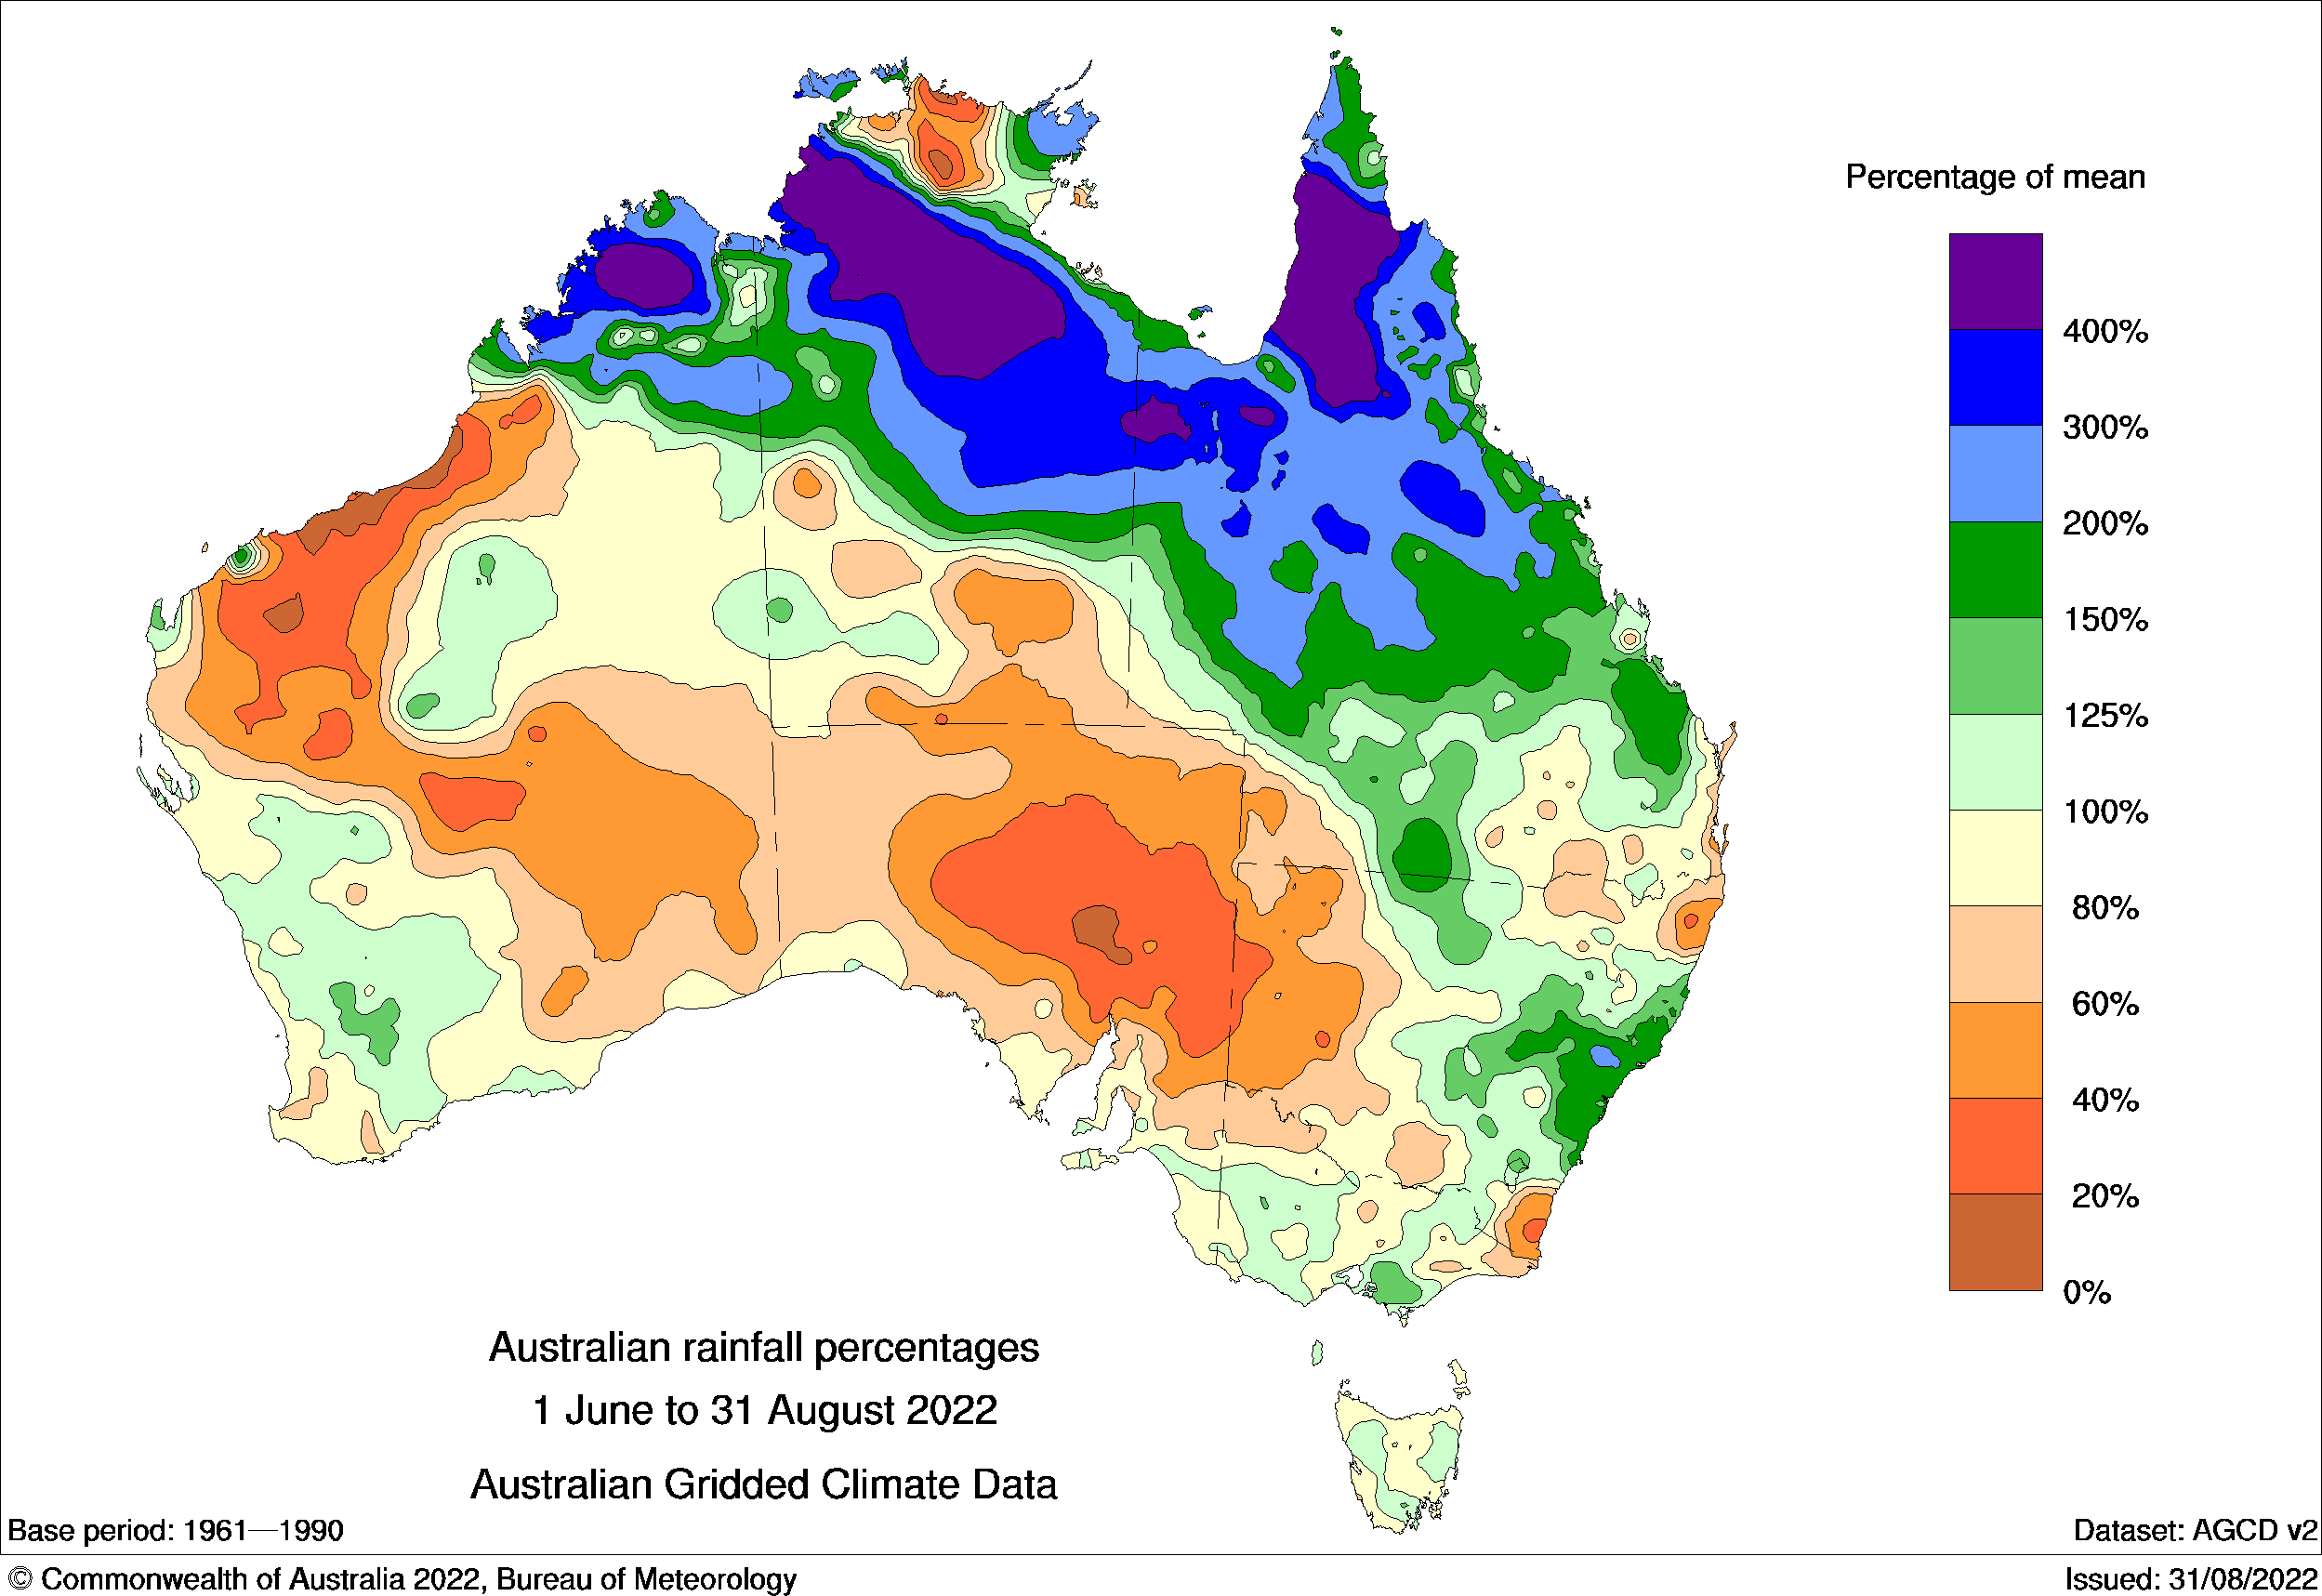 A map of Australia showing rainfall cncentrations.